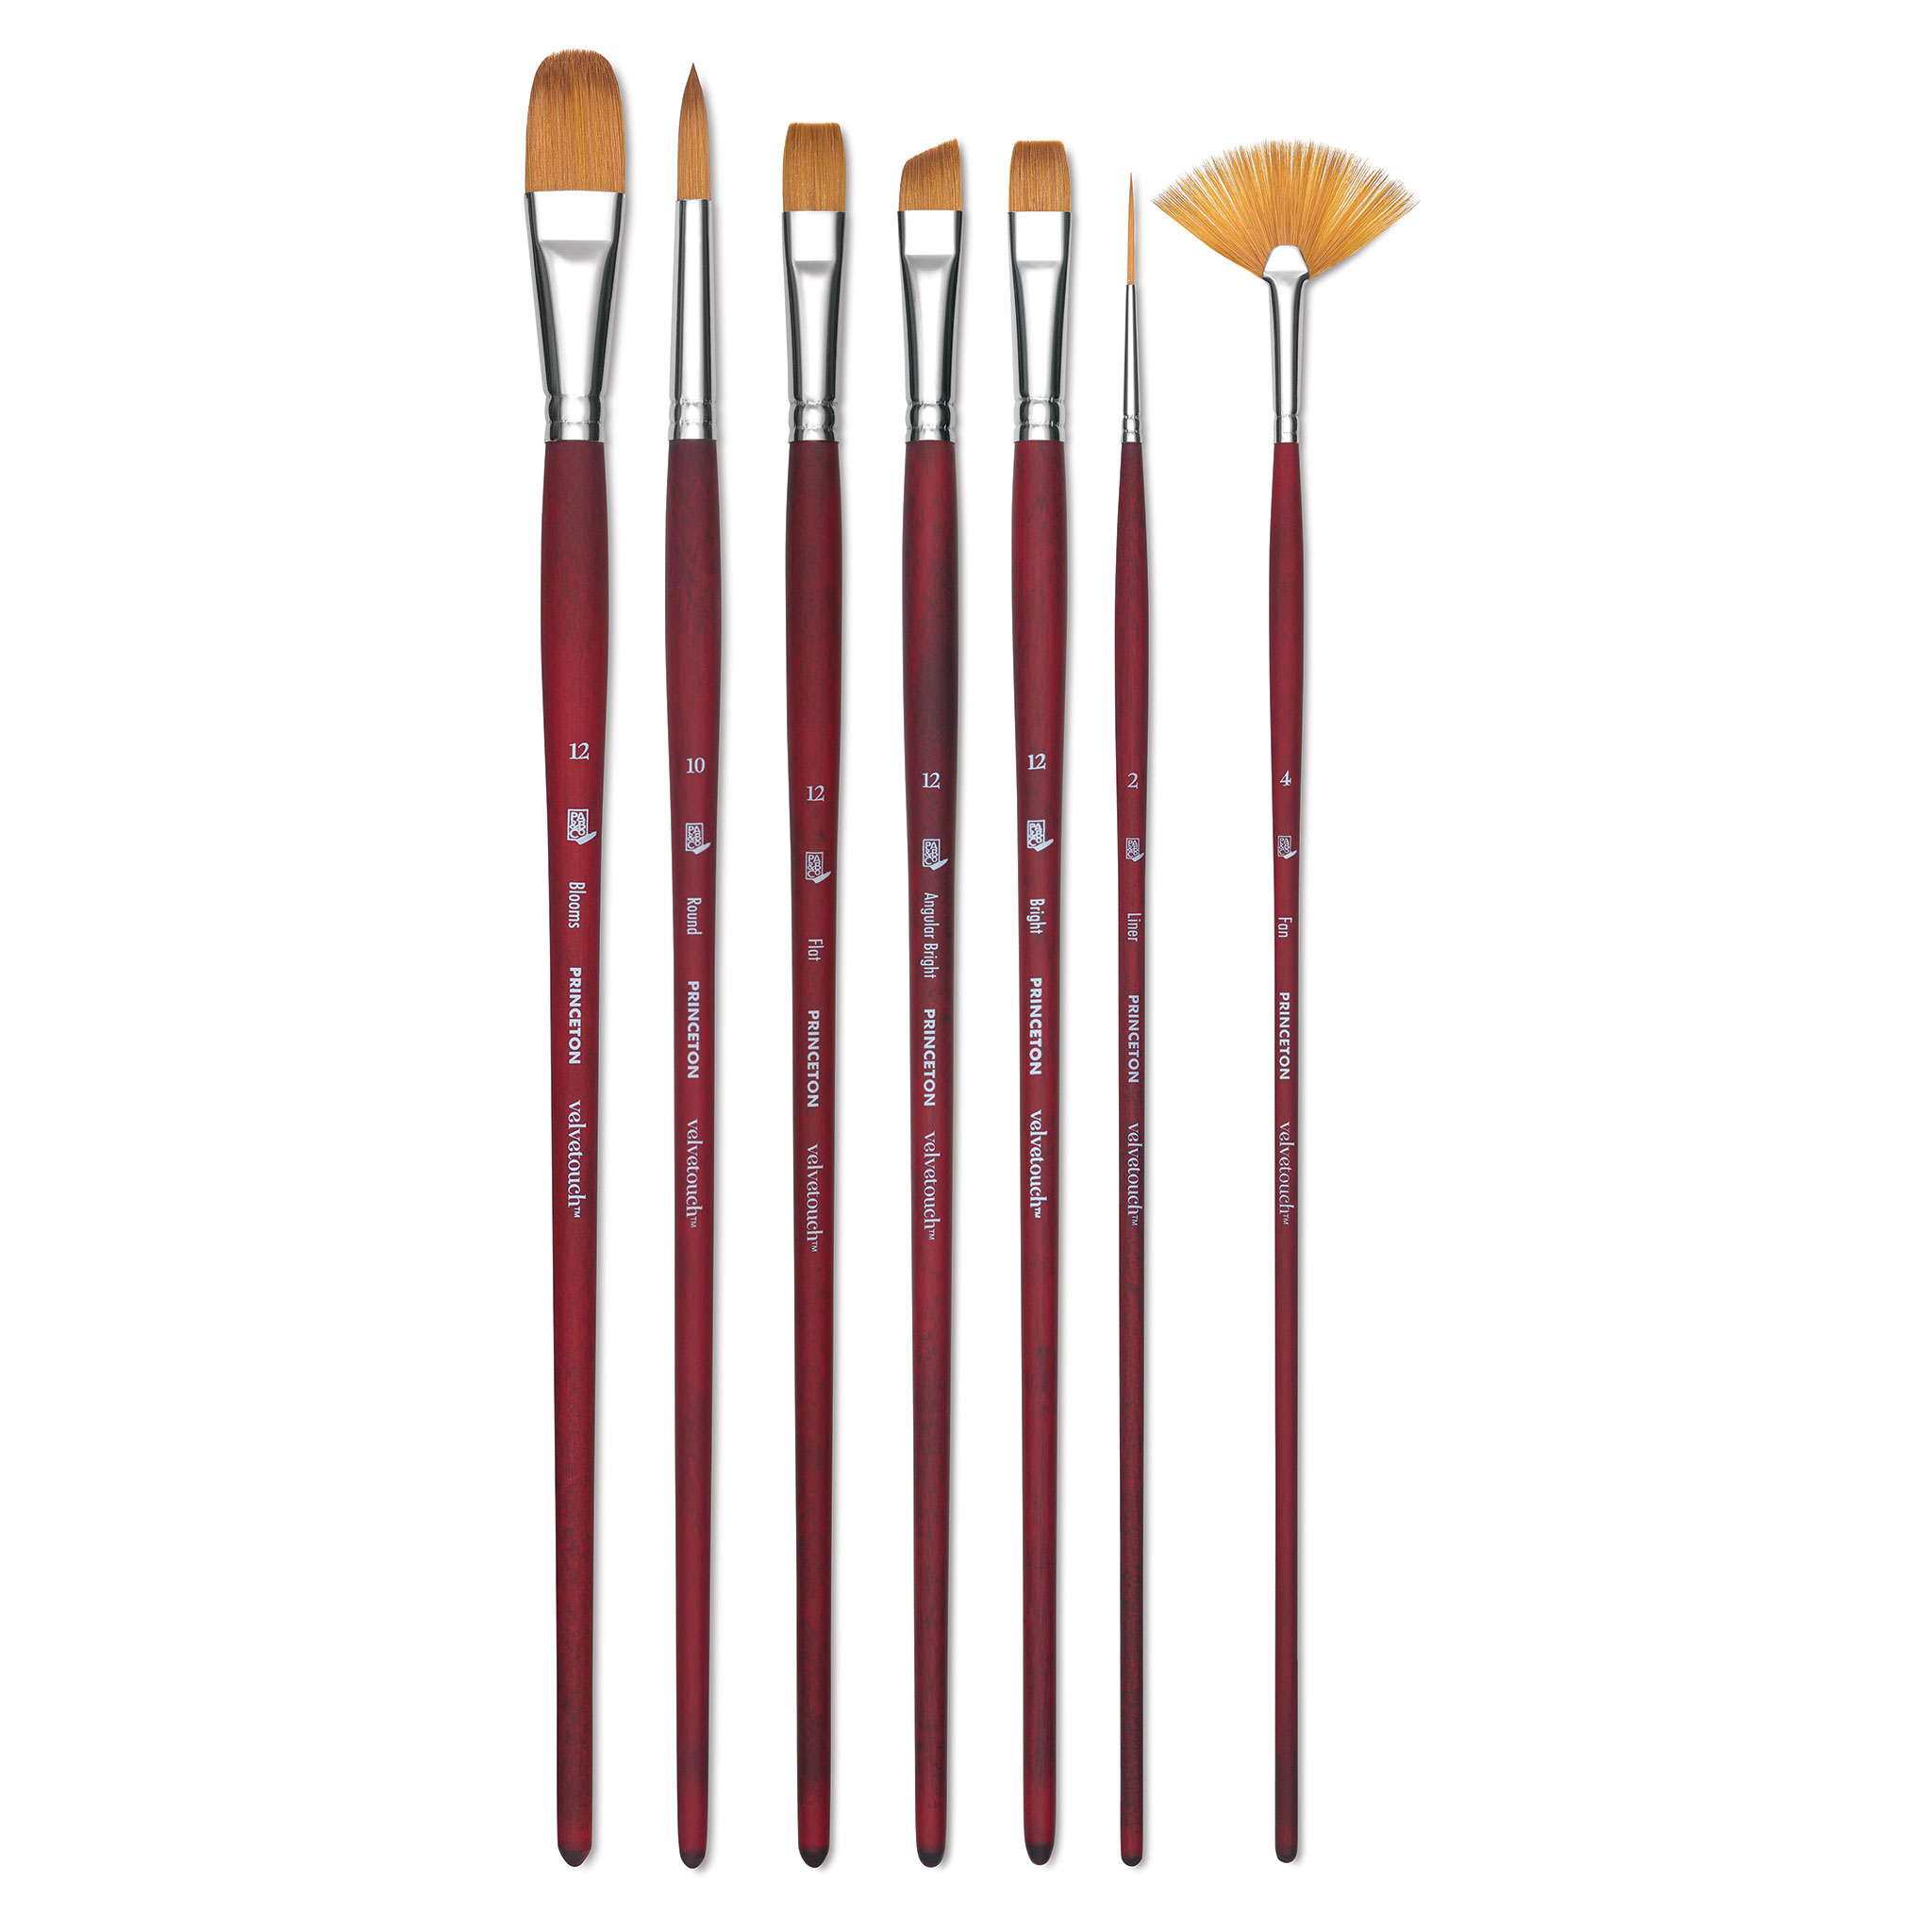 Princeton Velvetouch Series 3950 Synthetic Brushes and Set